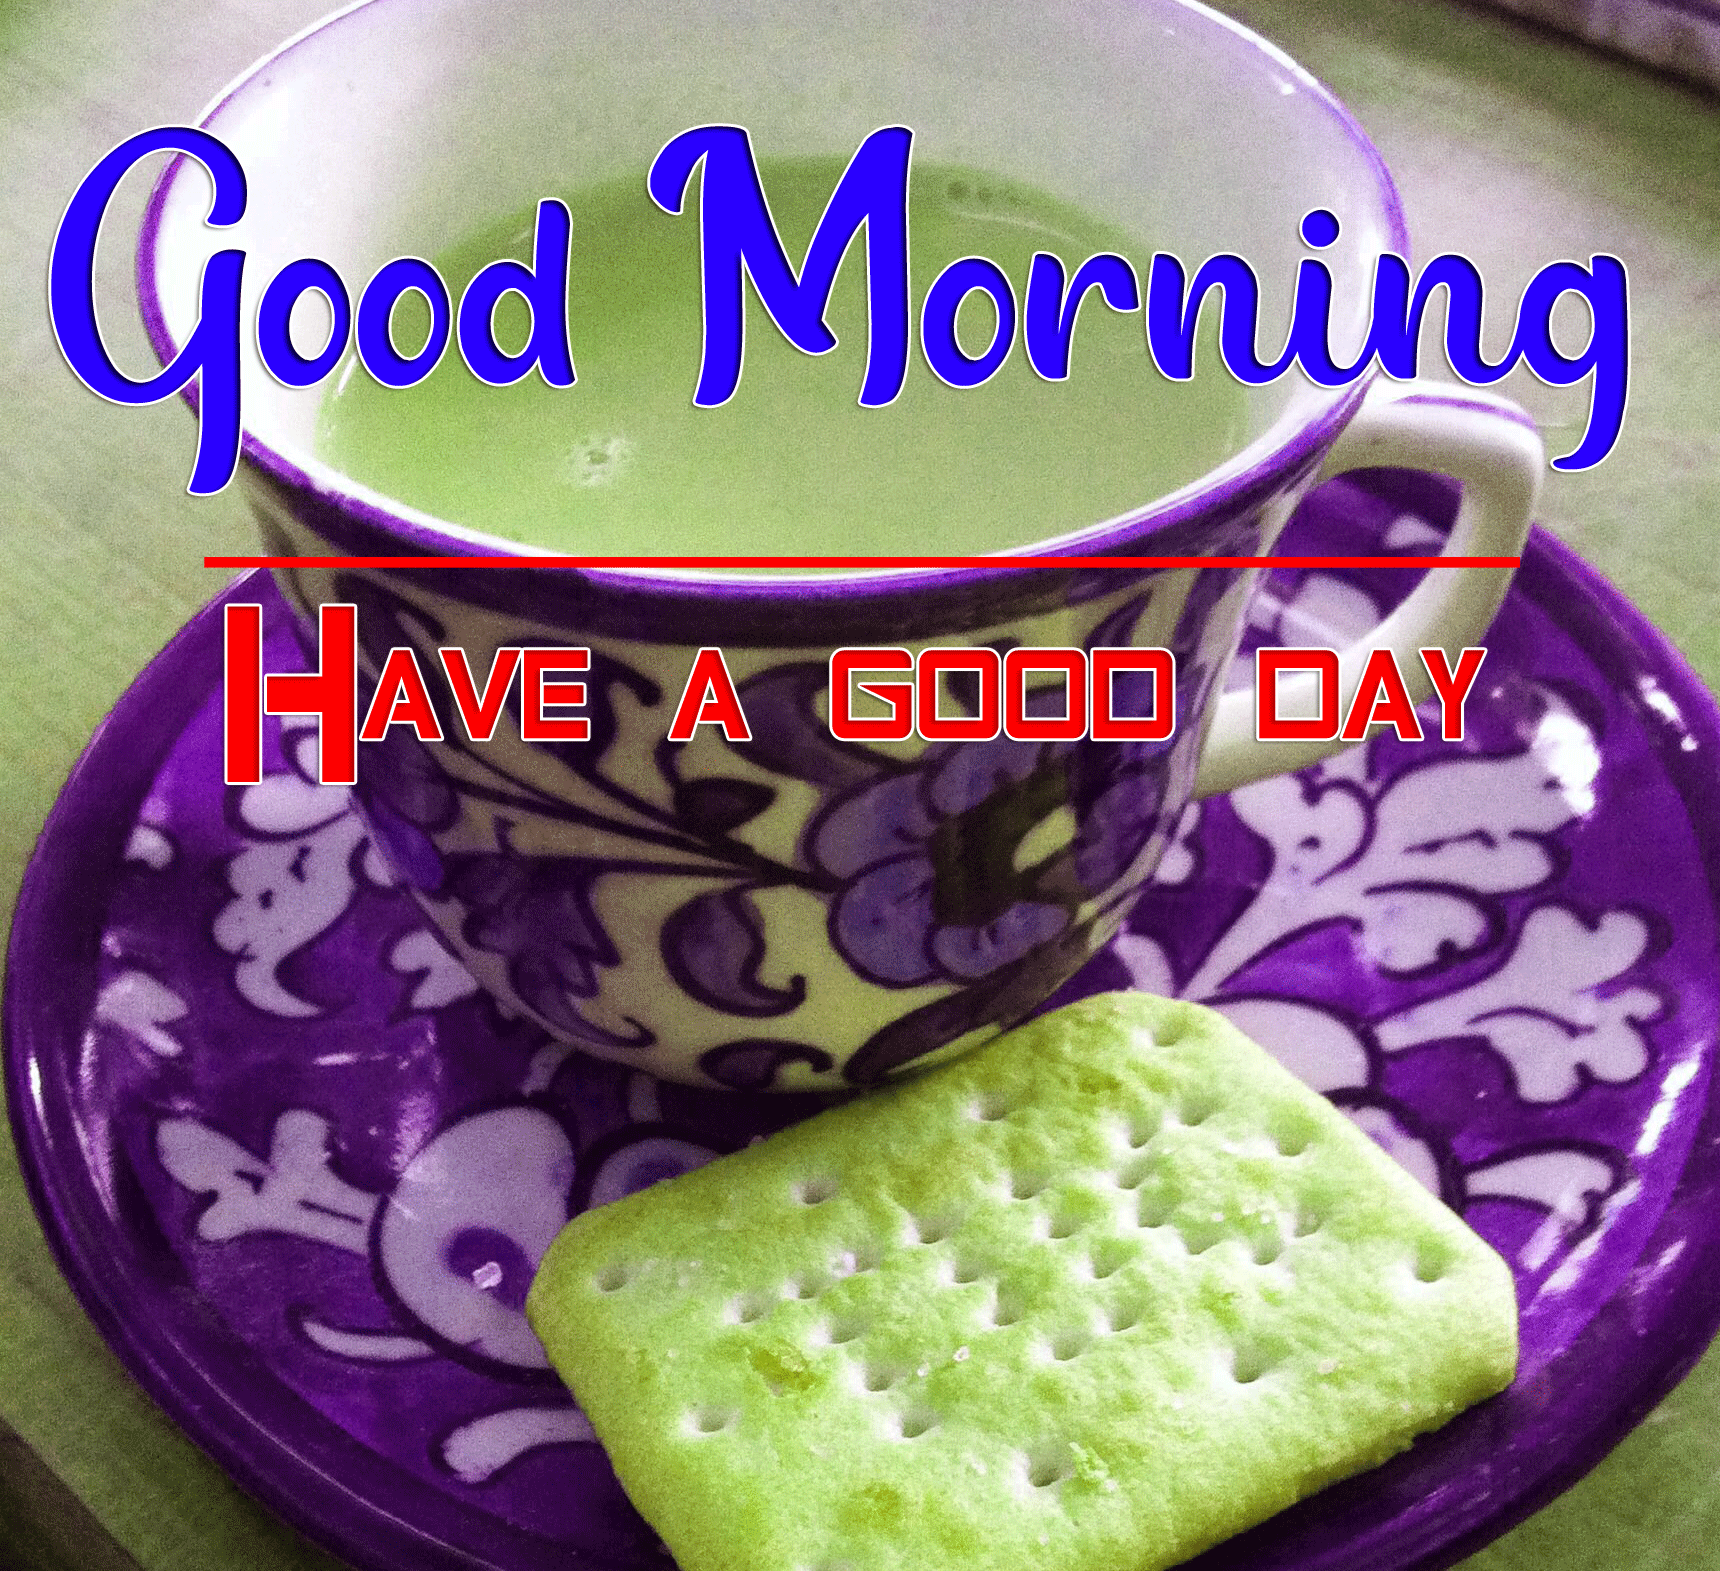 Good Morning Wishes Images HD 1080p 5